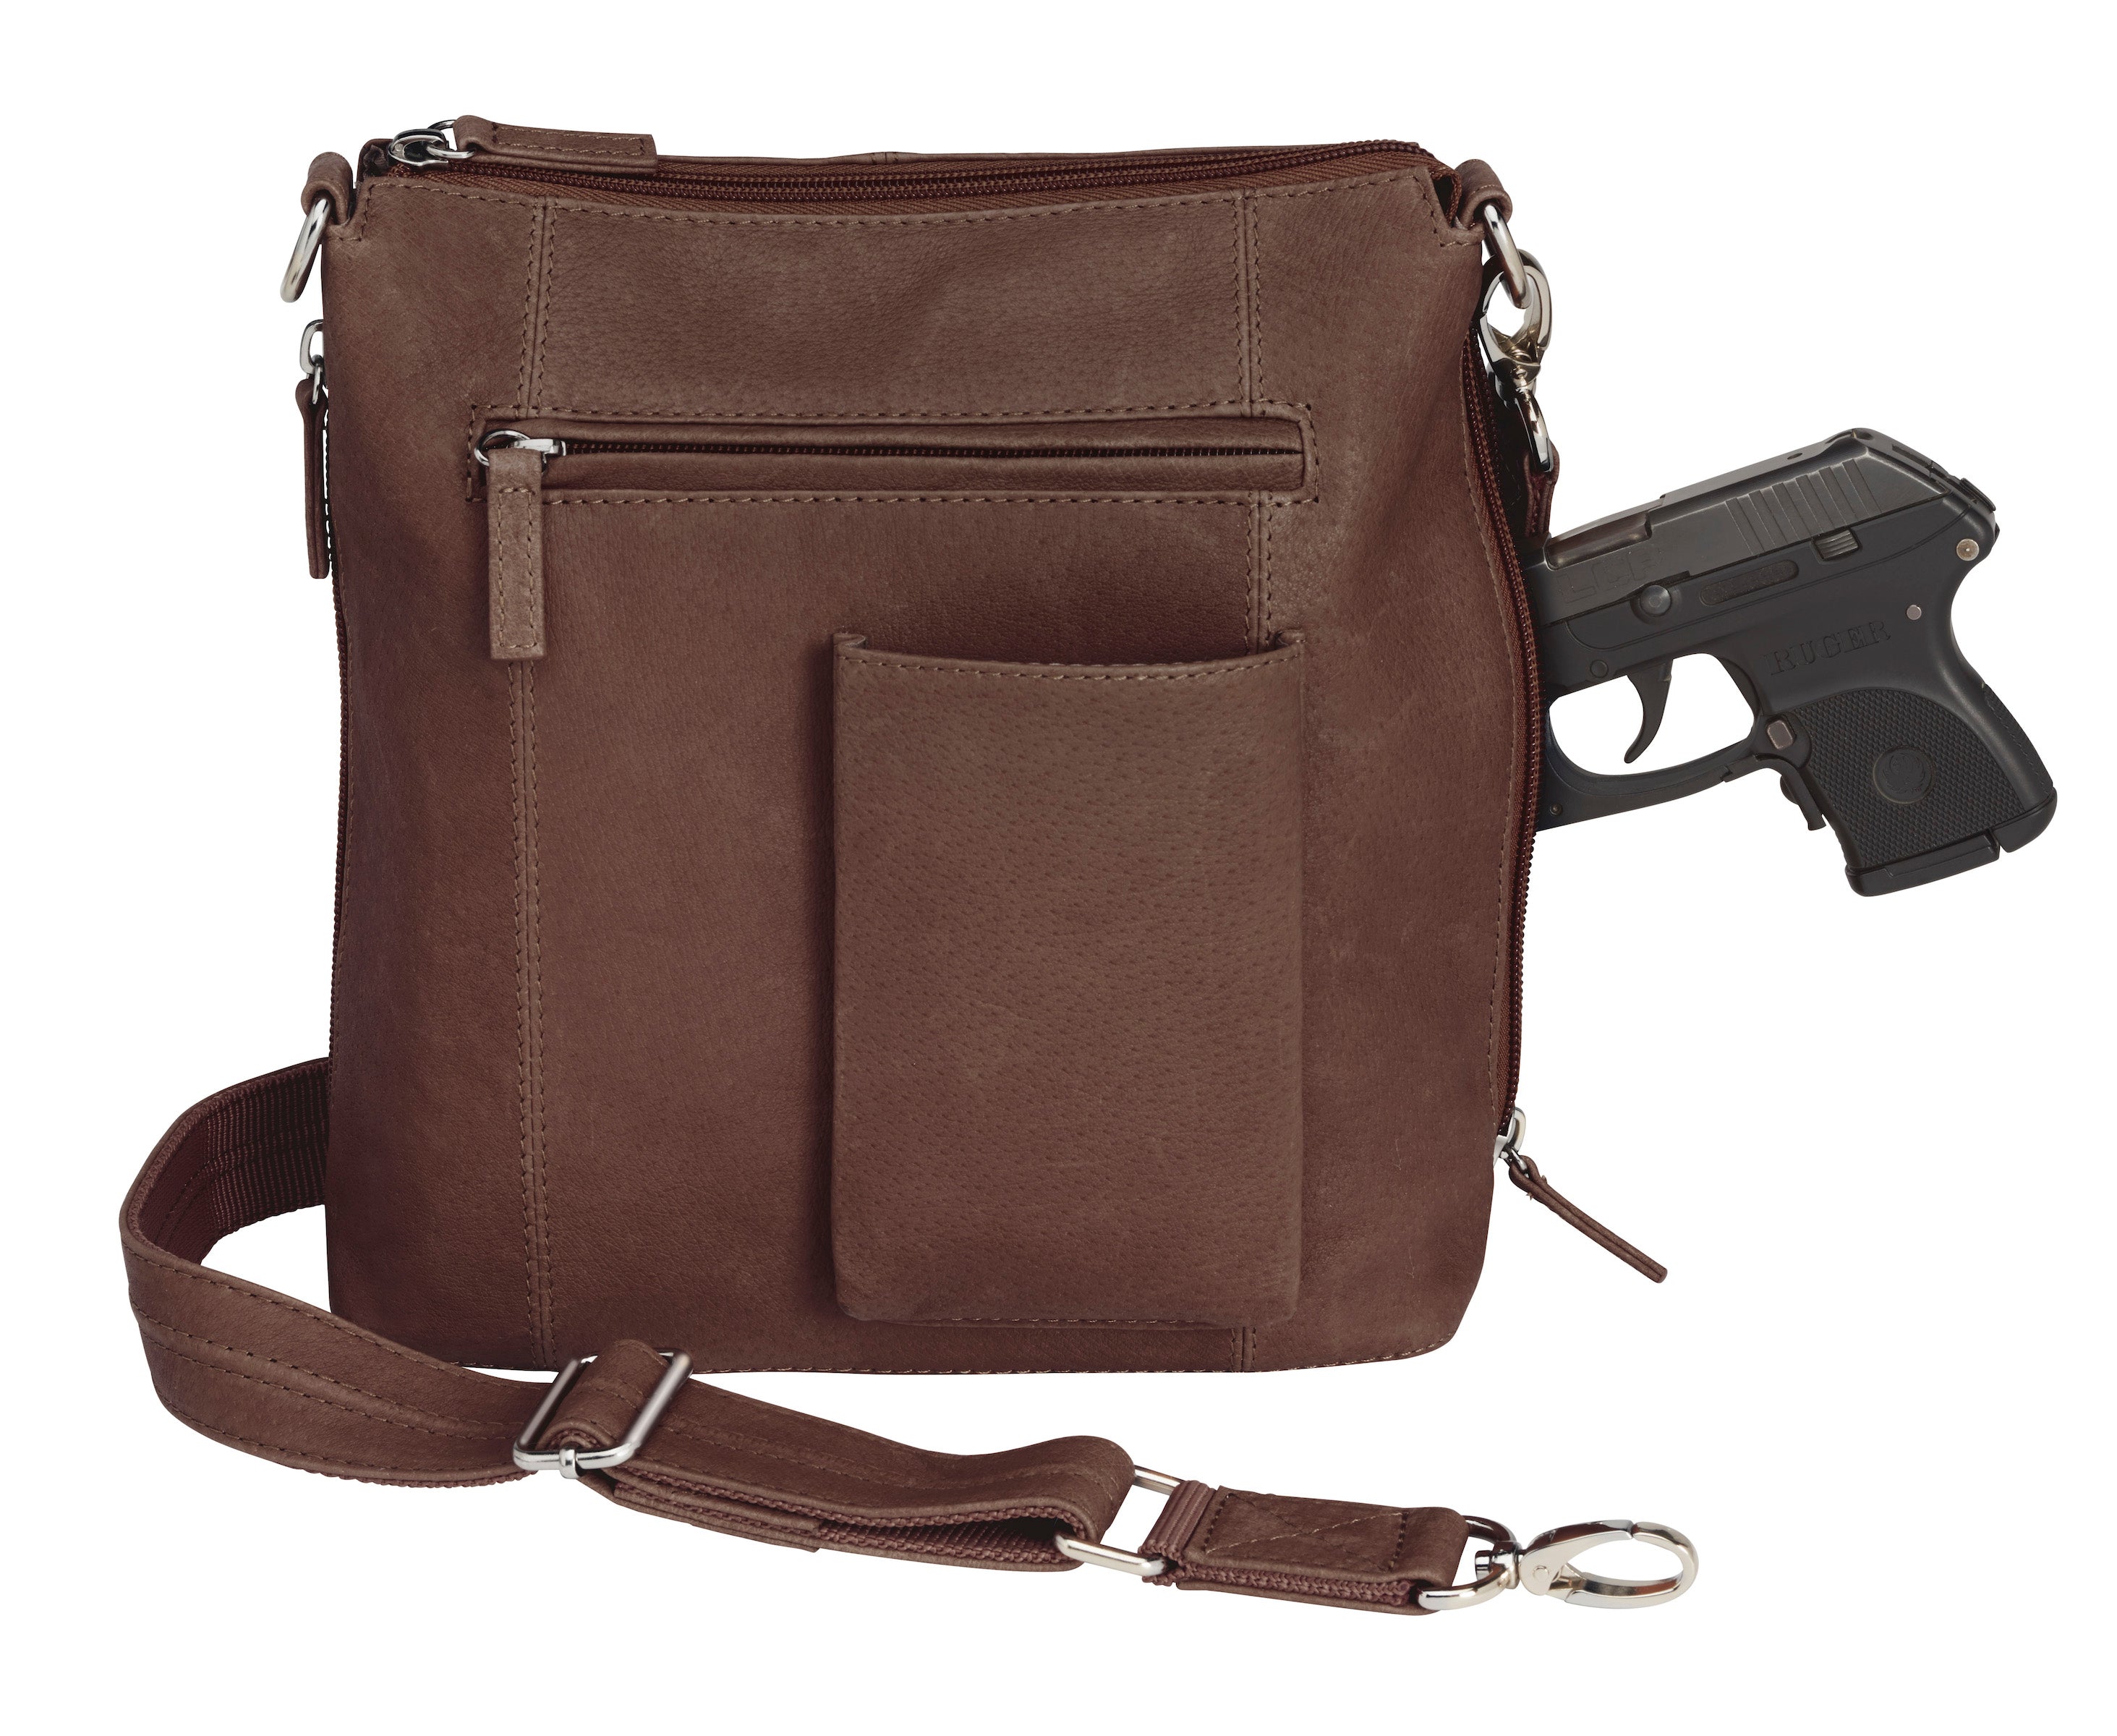 USCCA Concealed Carry Crossbody Purse - USCCA Store